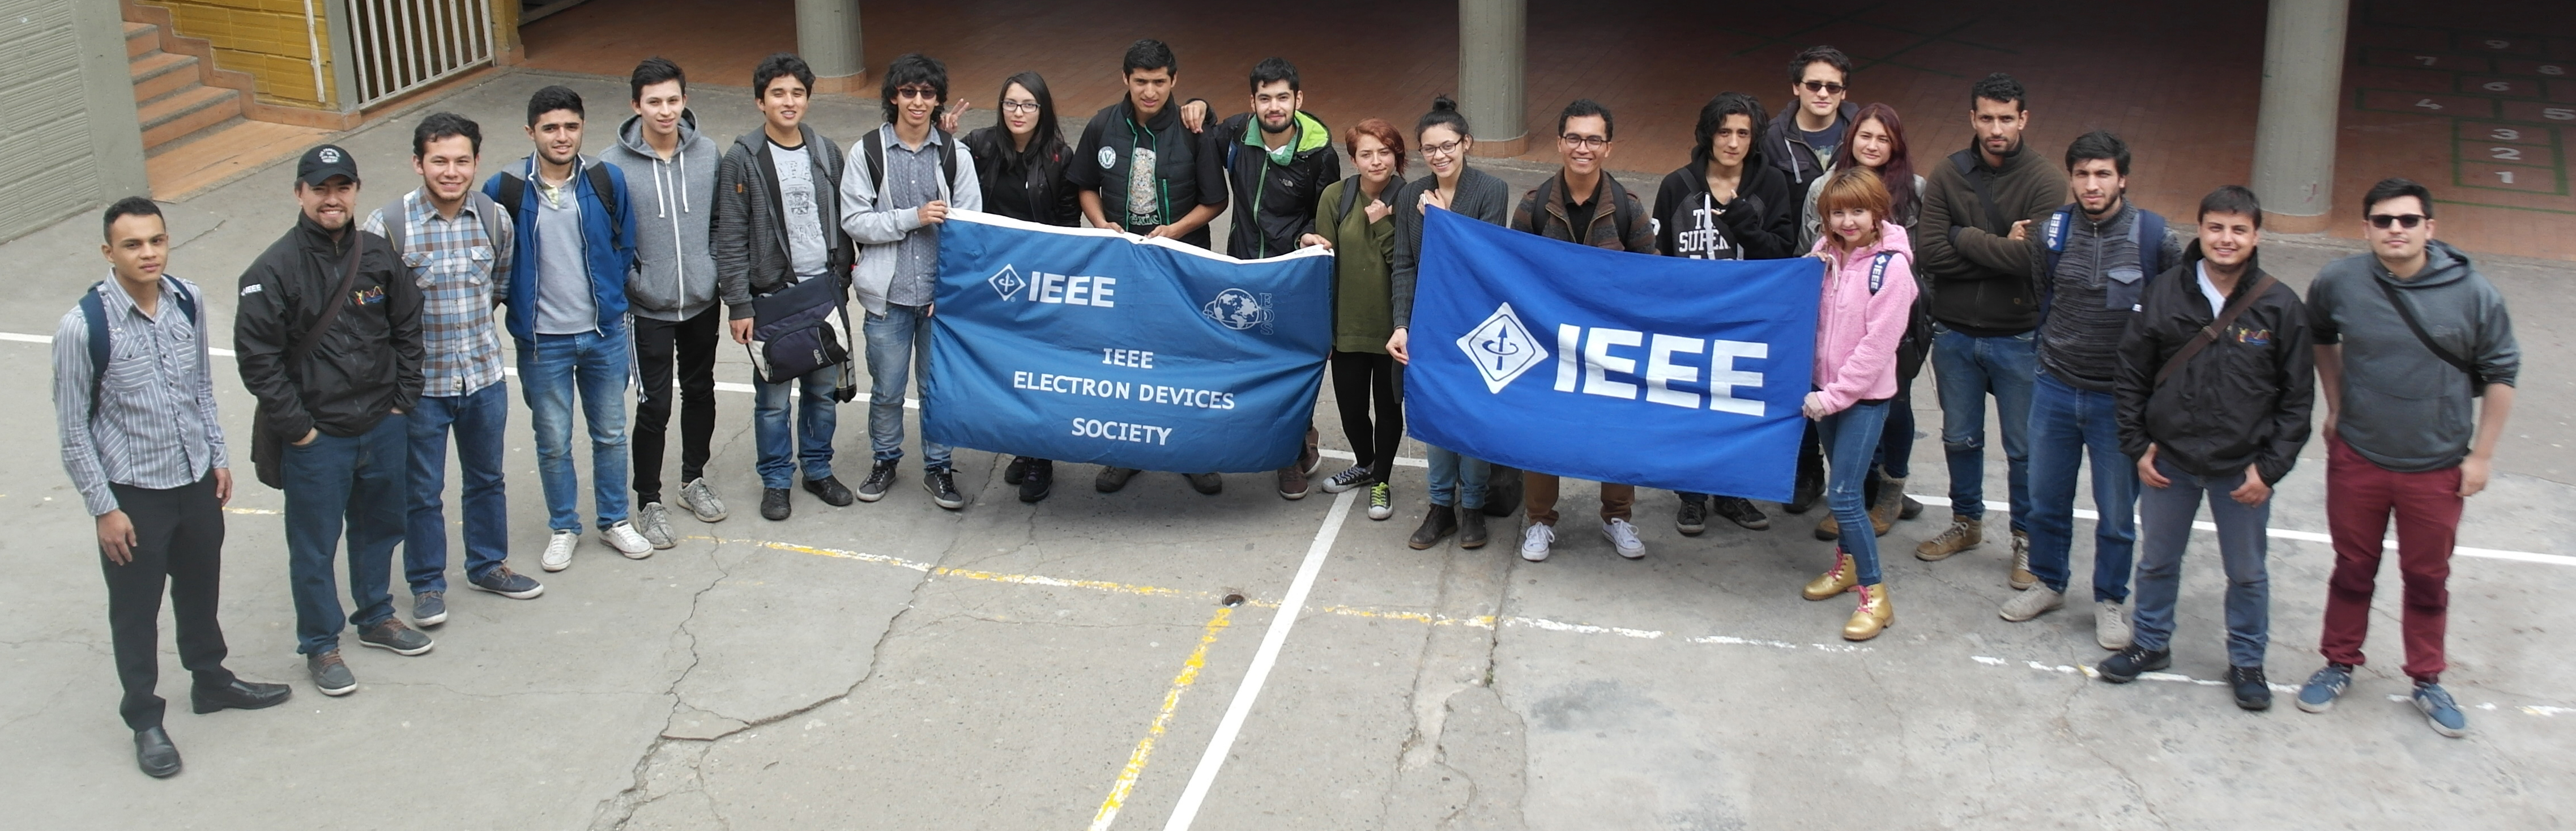 colombia student branch